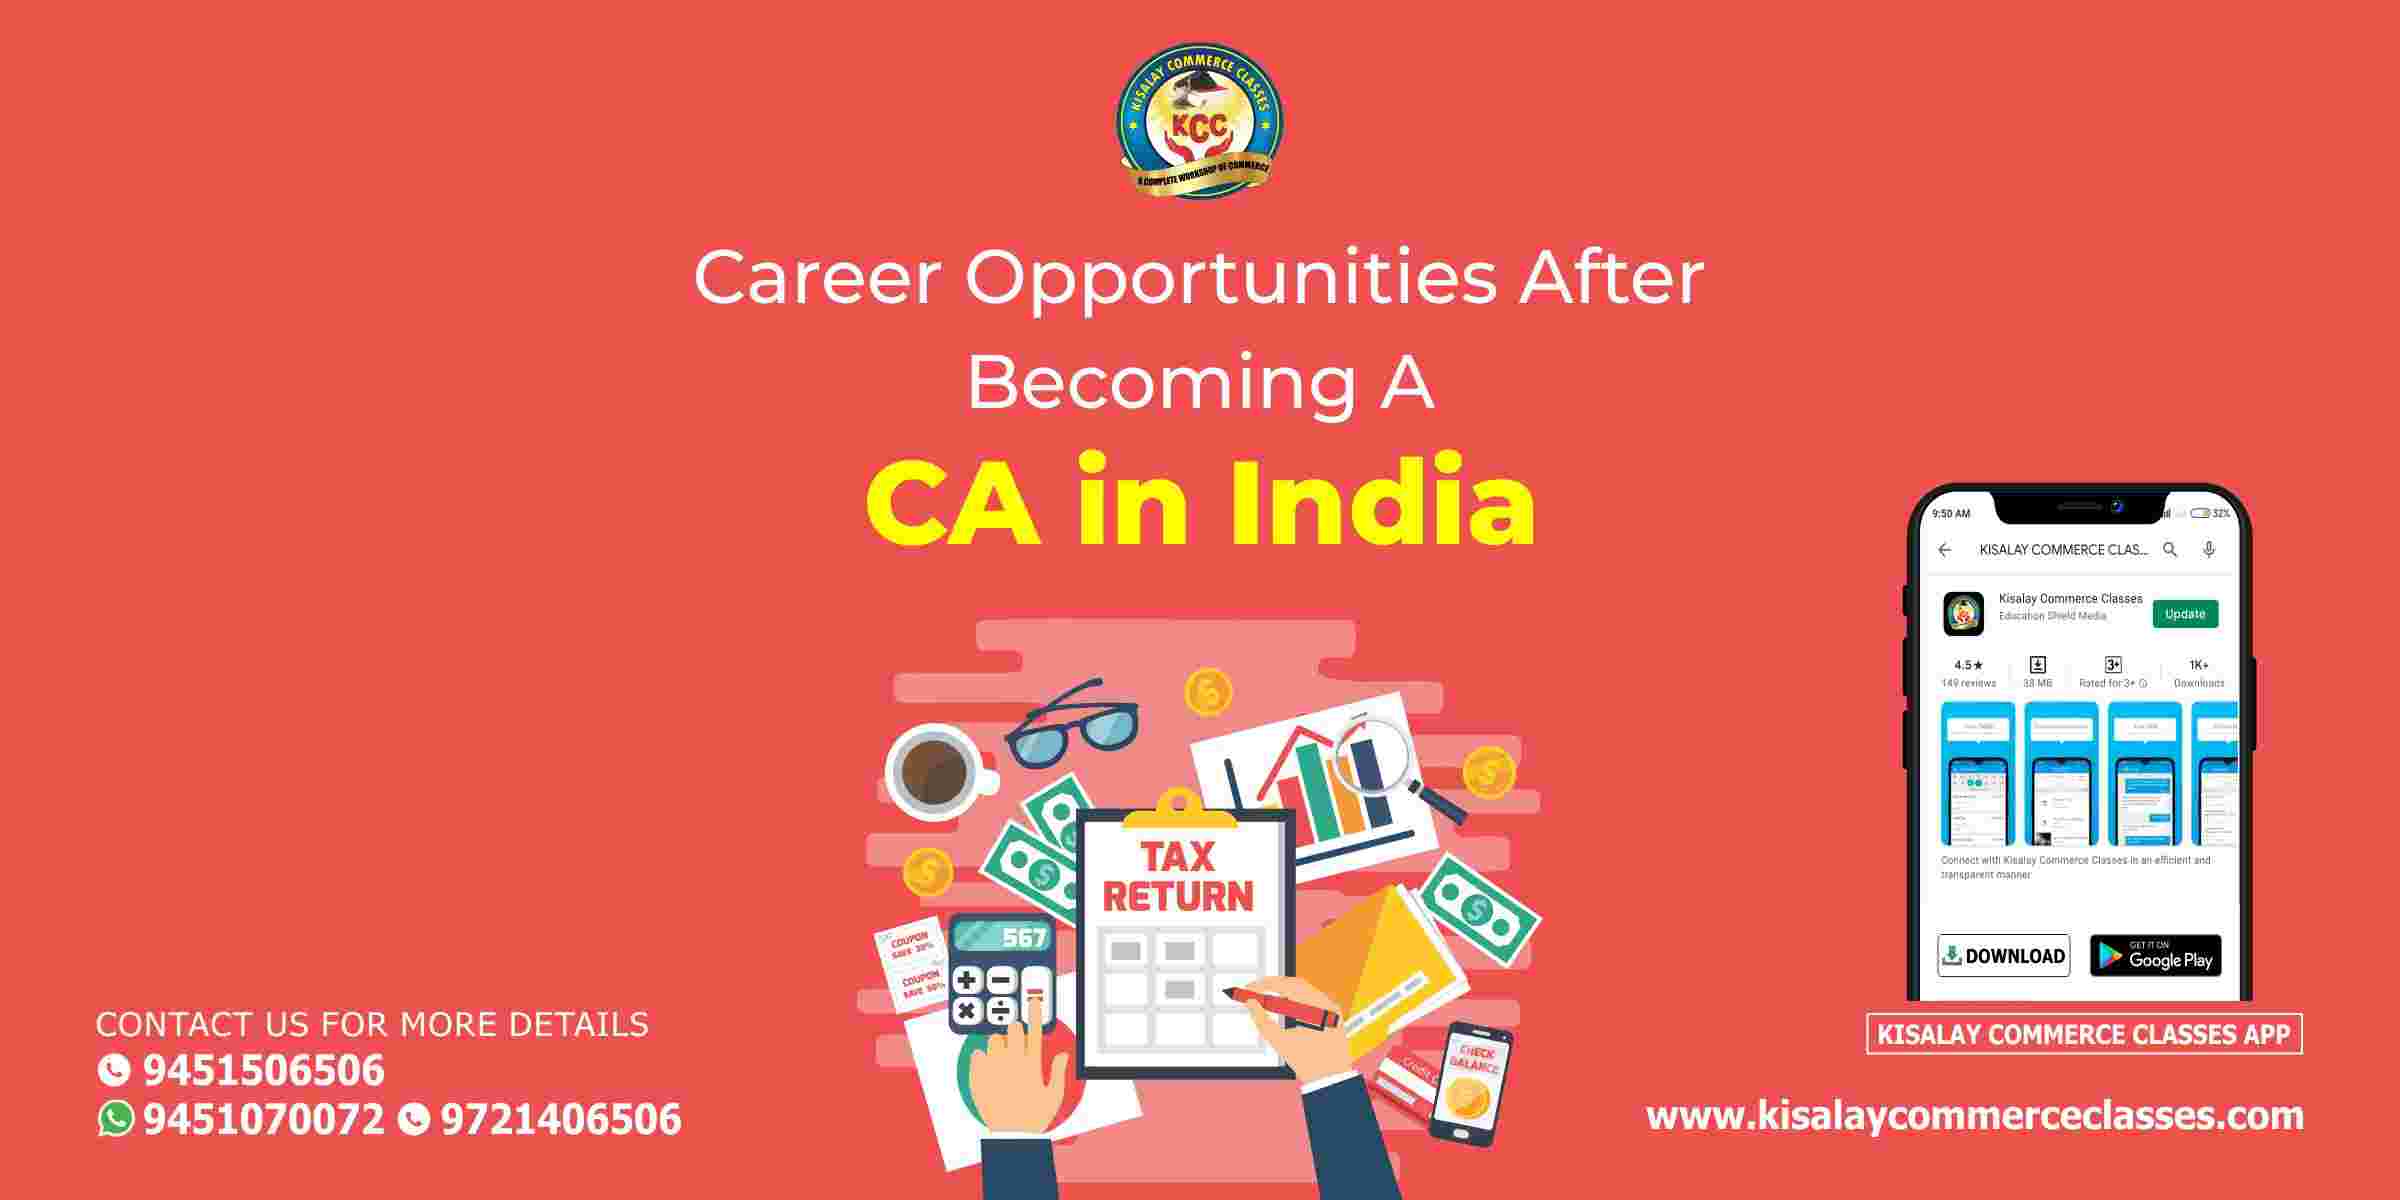 Career Opportunities After CA